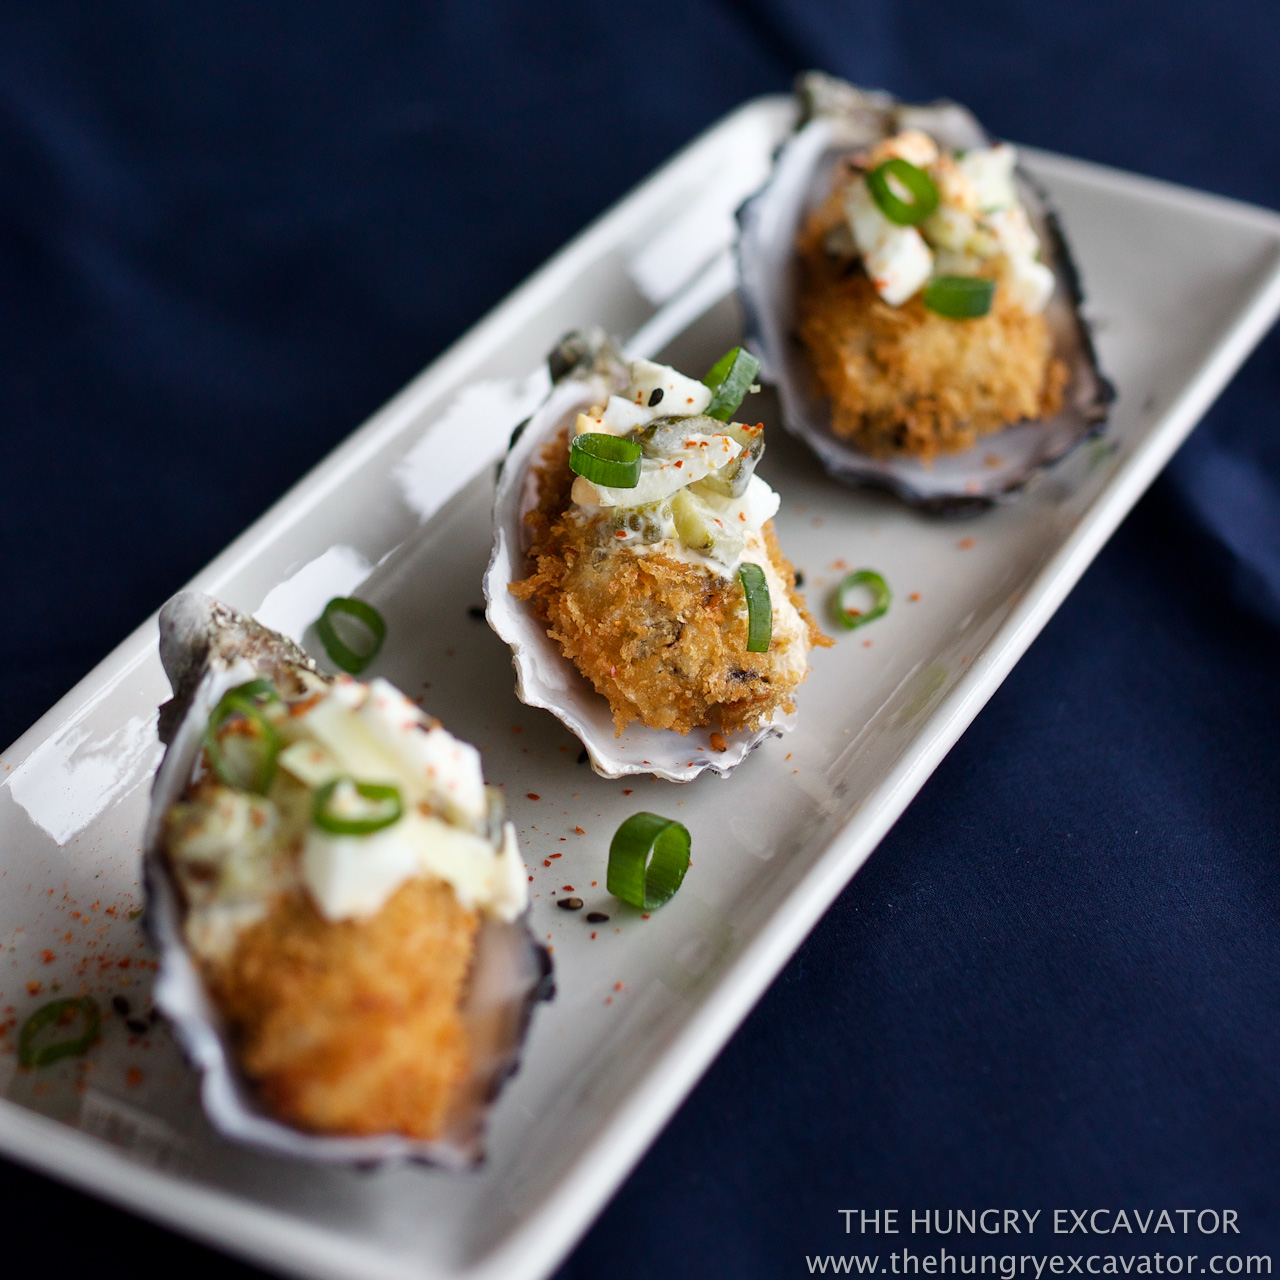 What is a good recipe for fried oysters?